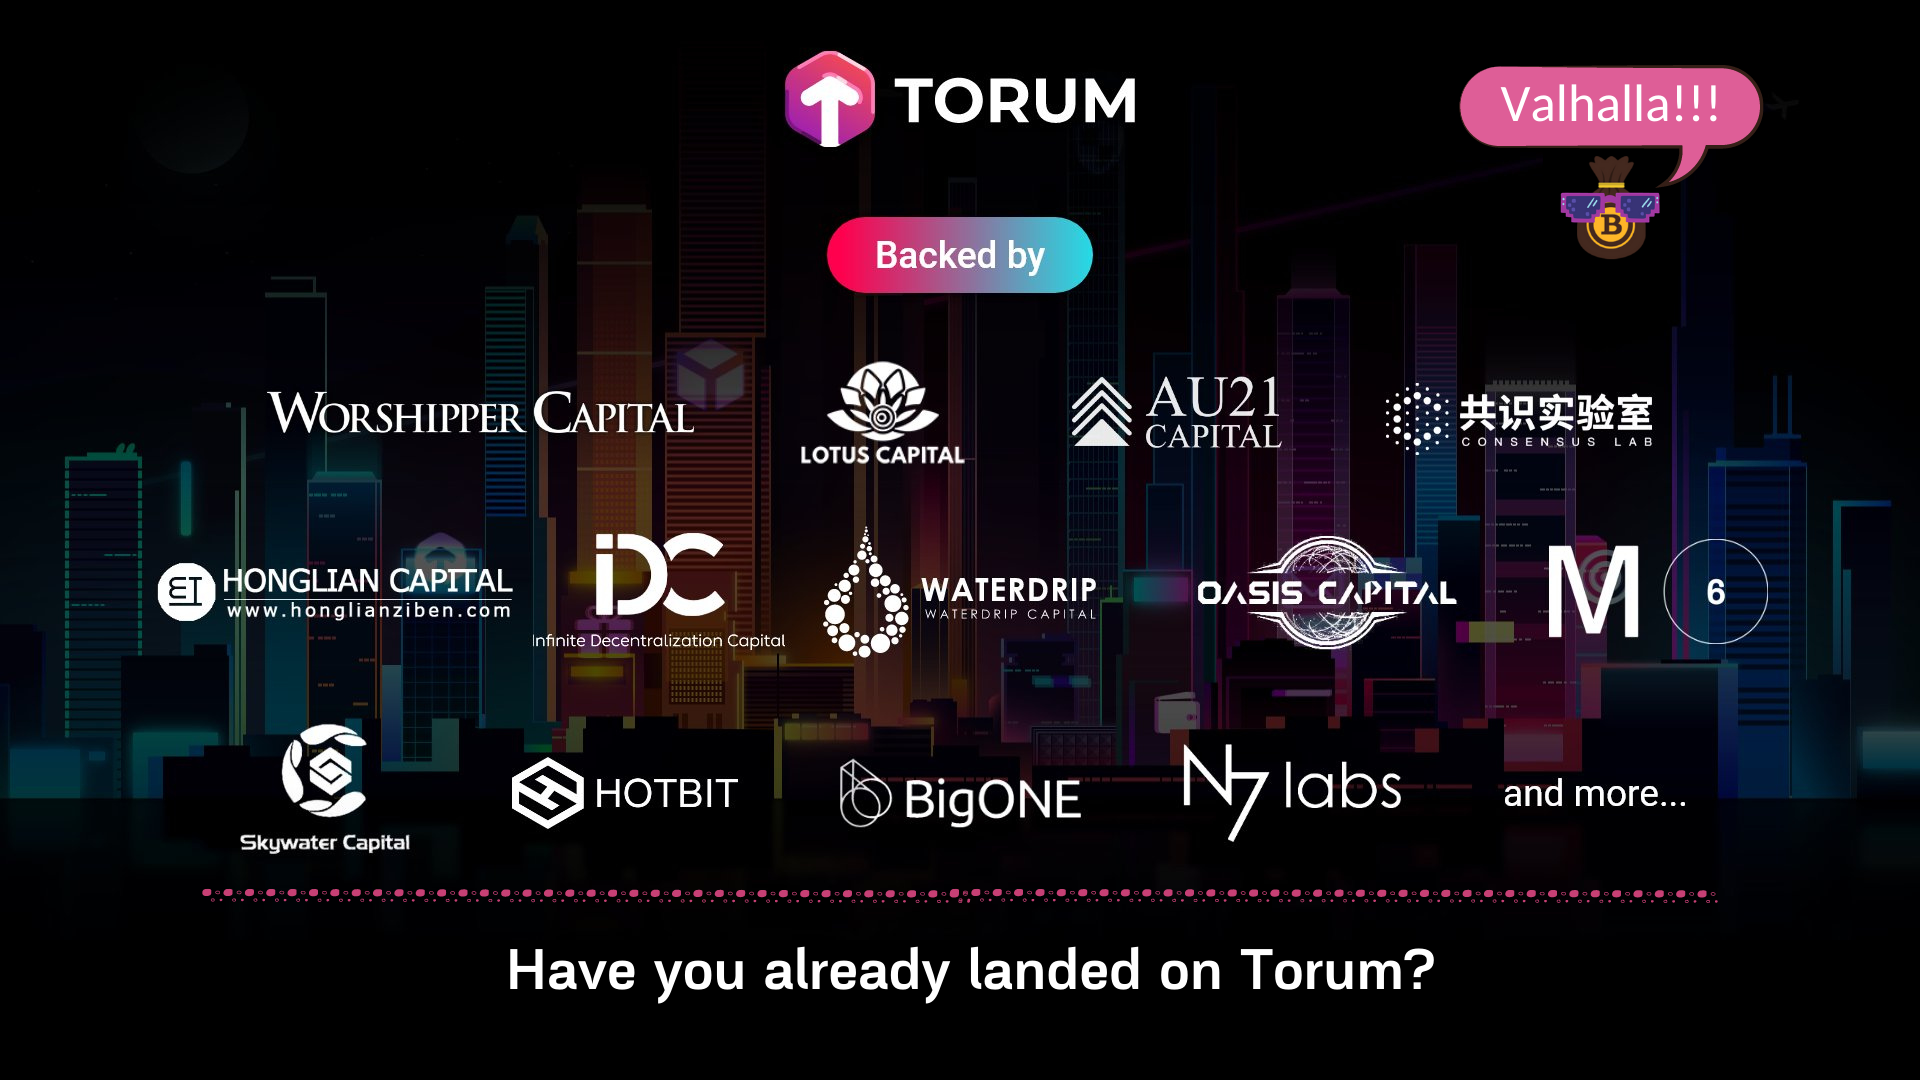 @bagofincome/torum-raises-usd1-45m-from-13-private-investors-and-is-working-on-a-social-defi-nft-project